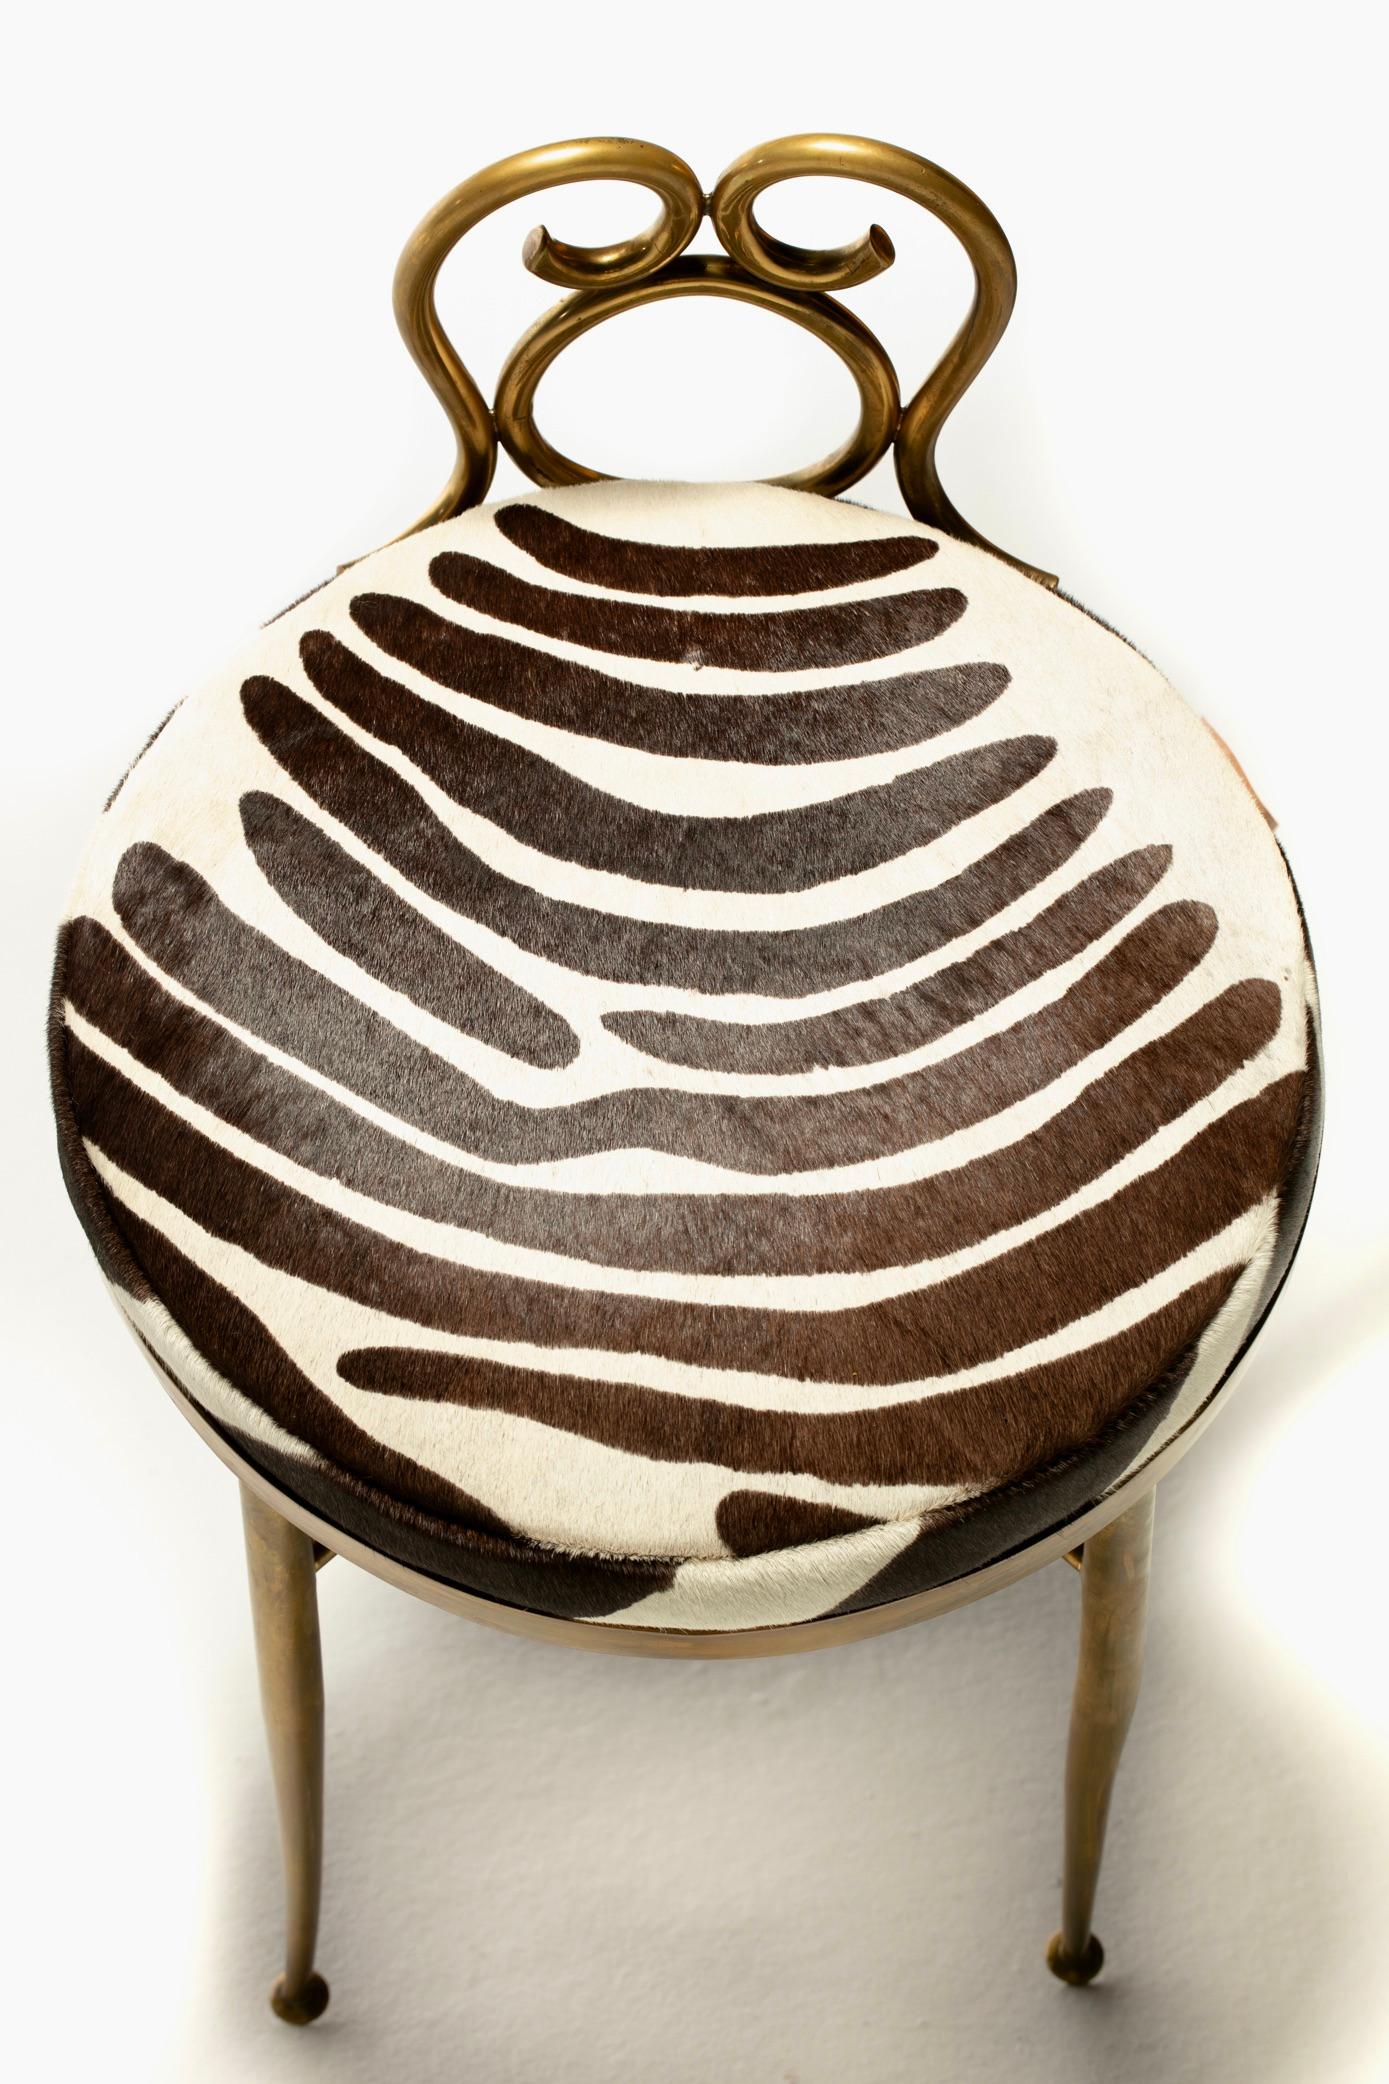 Elegant from all sides and exuding sex appeal all over is this Tommi Parzinger style Hollywood Regency vanity or dressing stool made of brass and finished in zebra print cowhide. Put on that sexy silk robe and have a seat in pure luxury. This 1960s